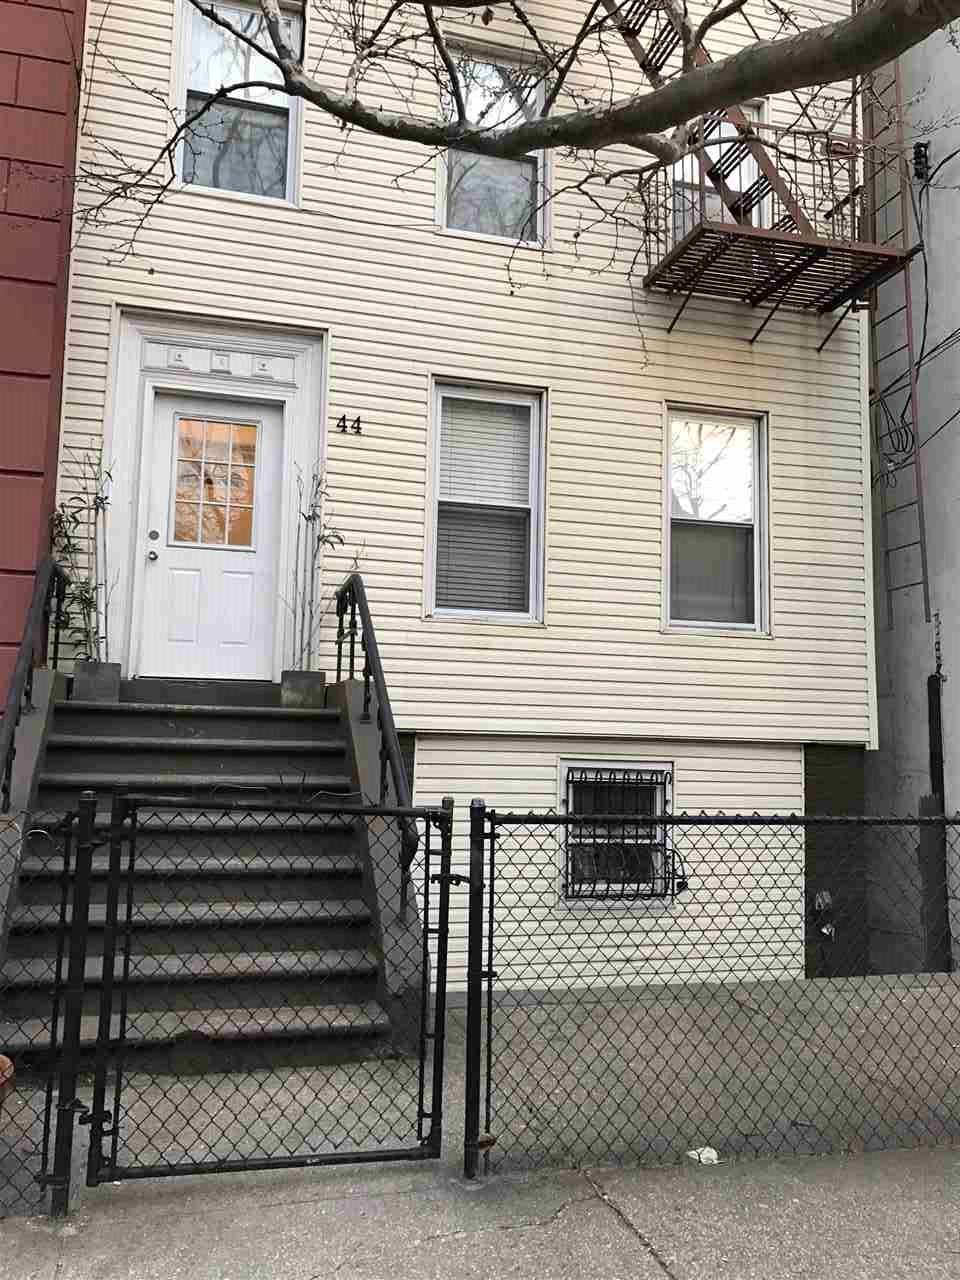 Spacious 2 bedroom/1 bathroom ground floor apartment located in Downtown section of Jersey City